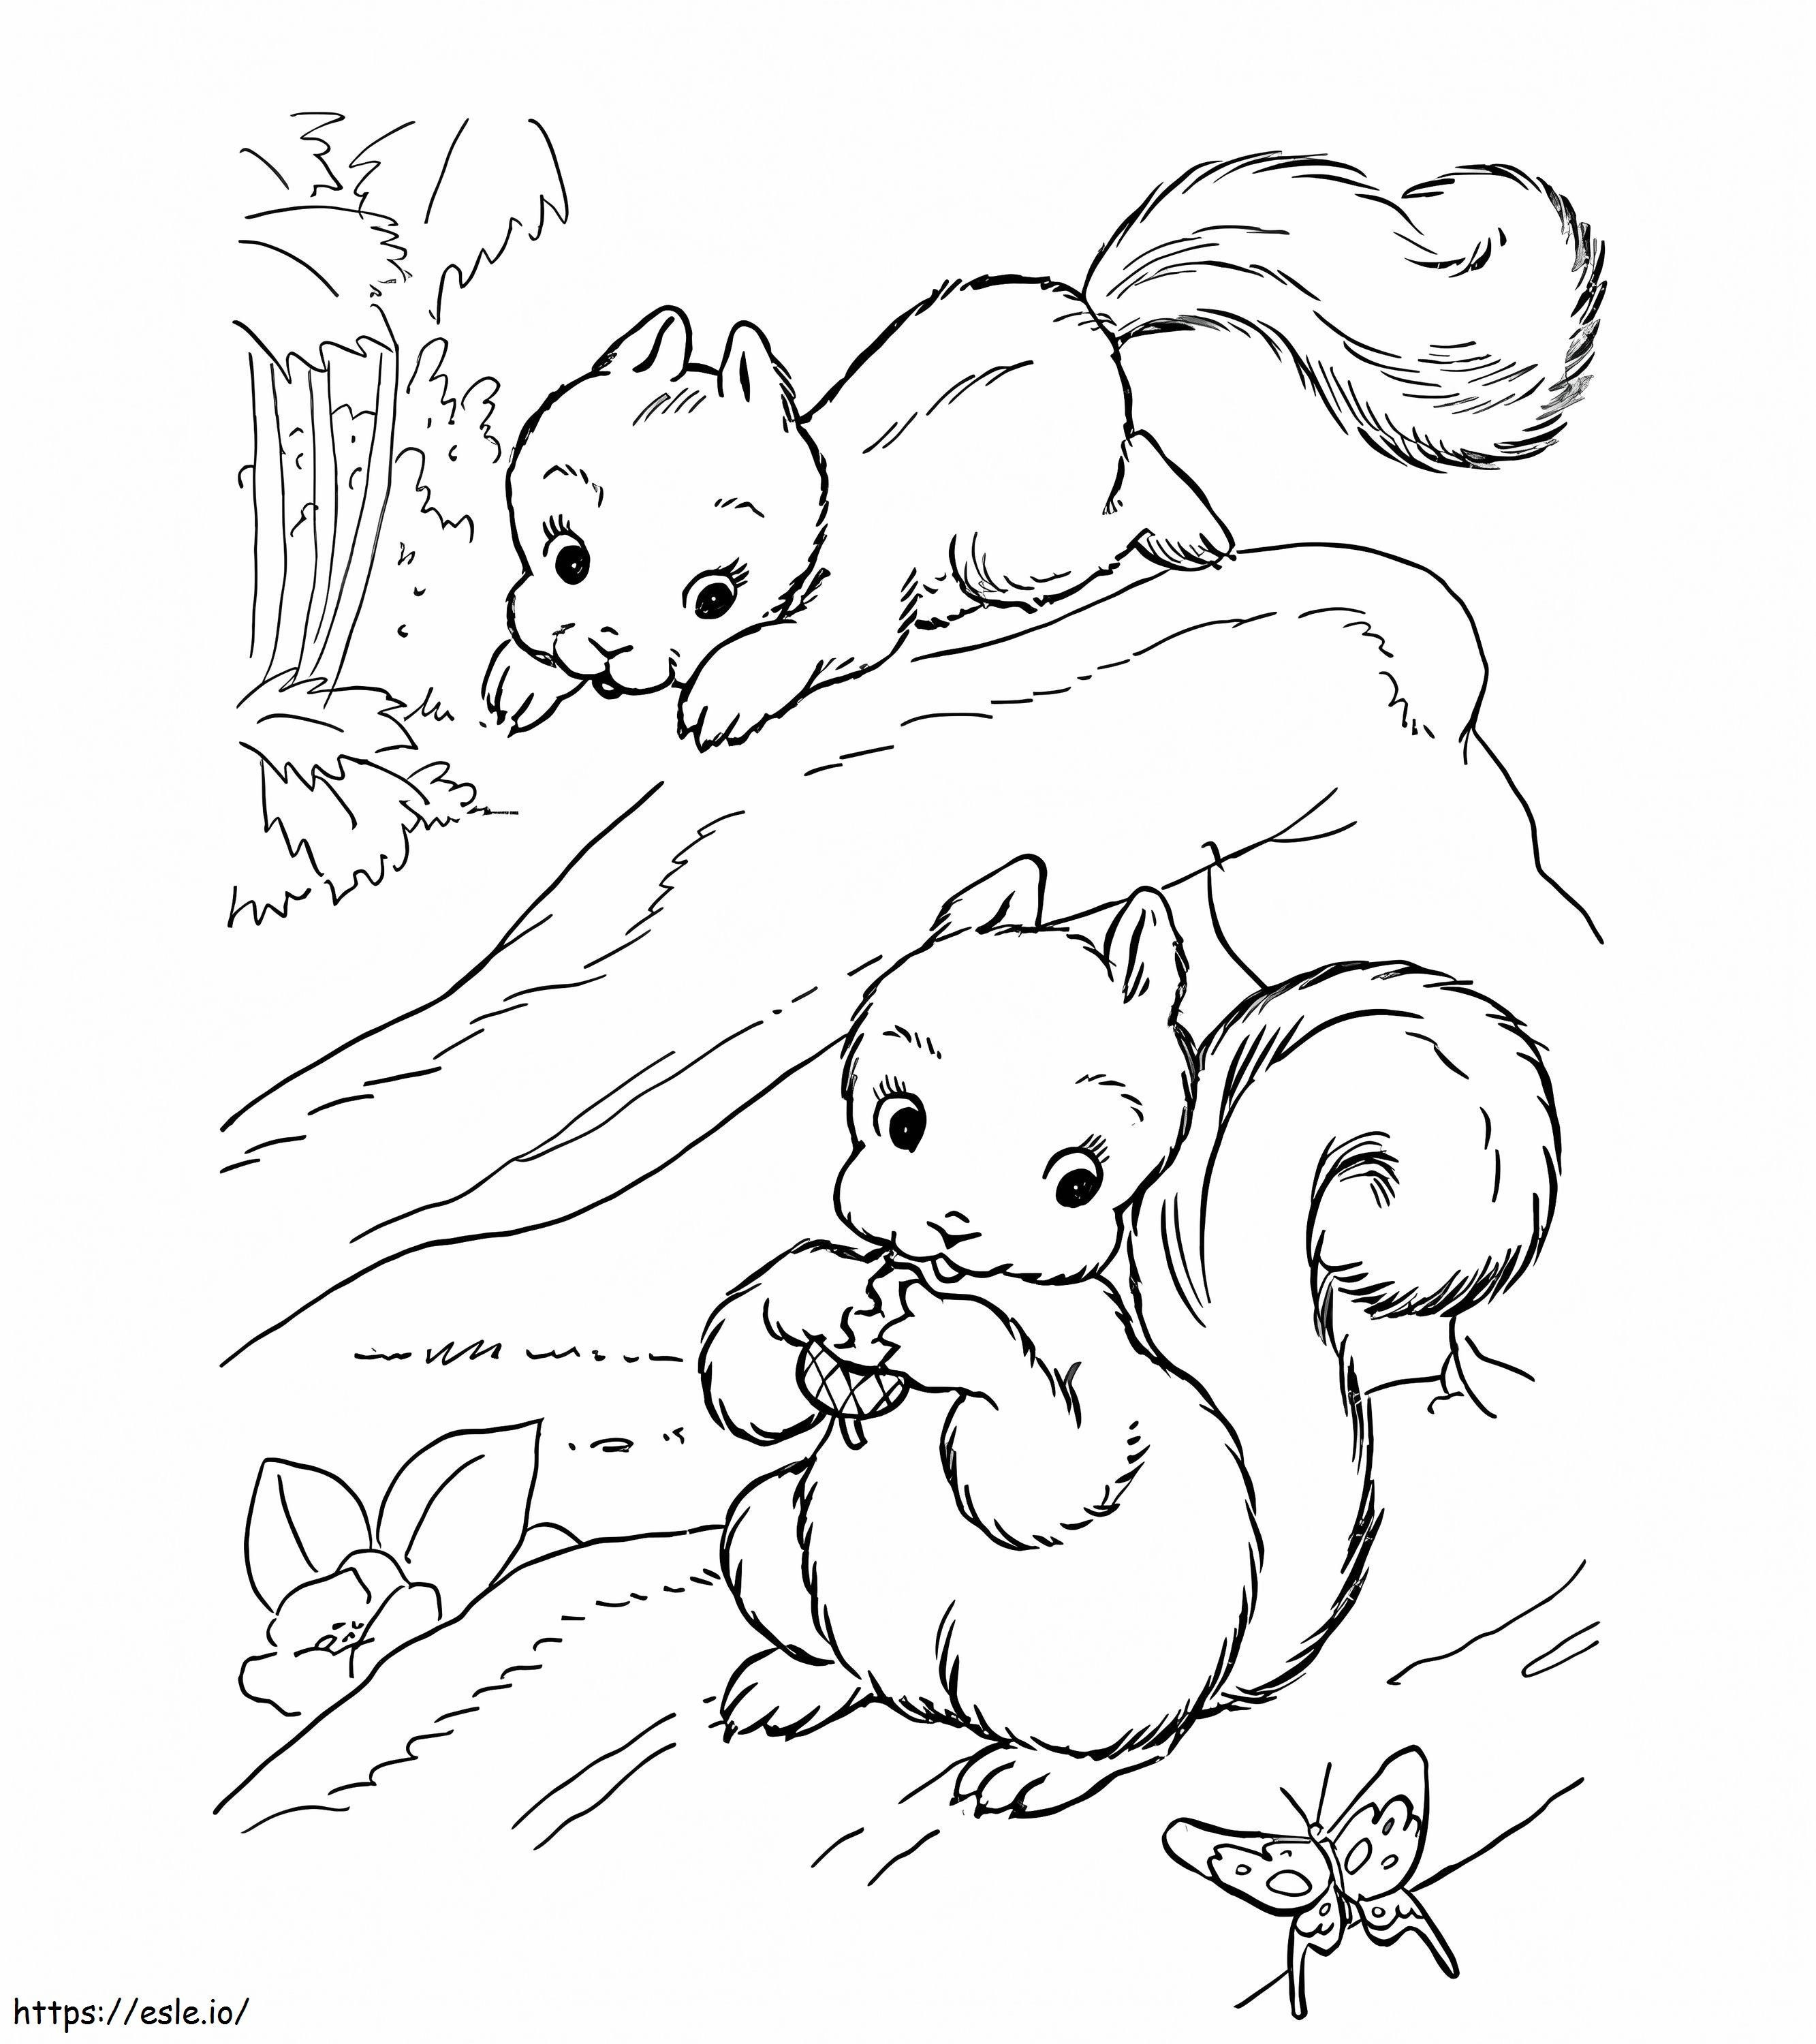 Two Squirrels coloring page